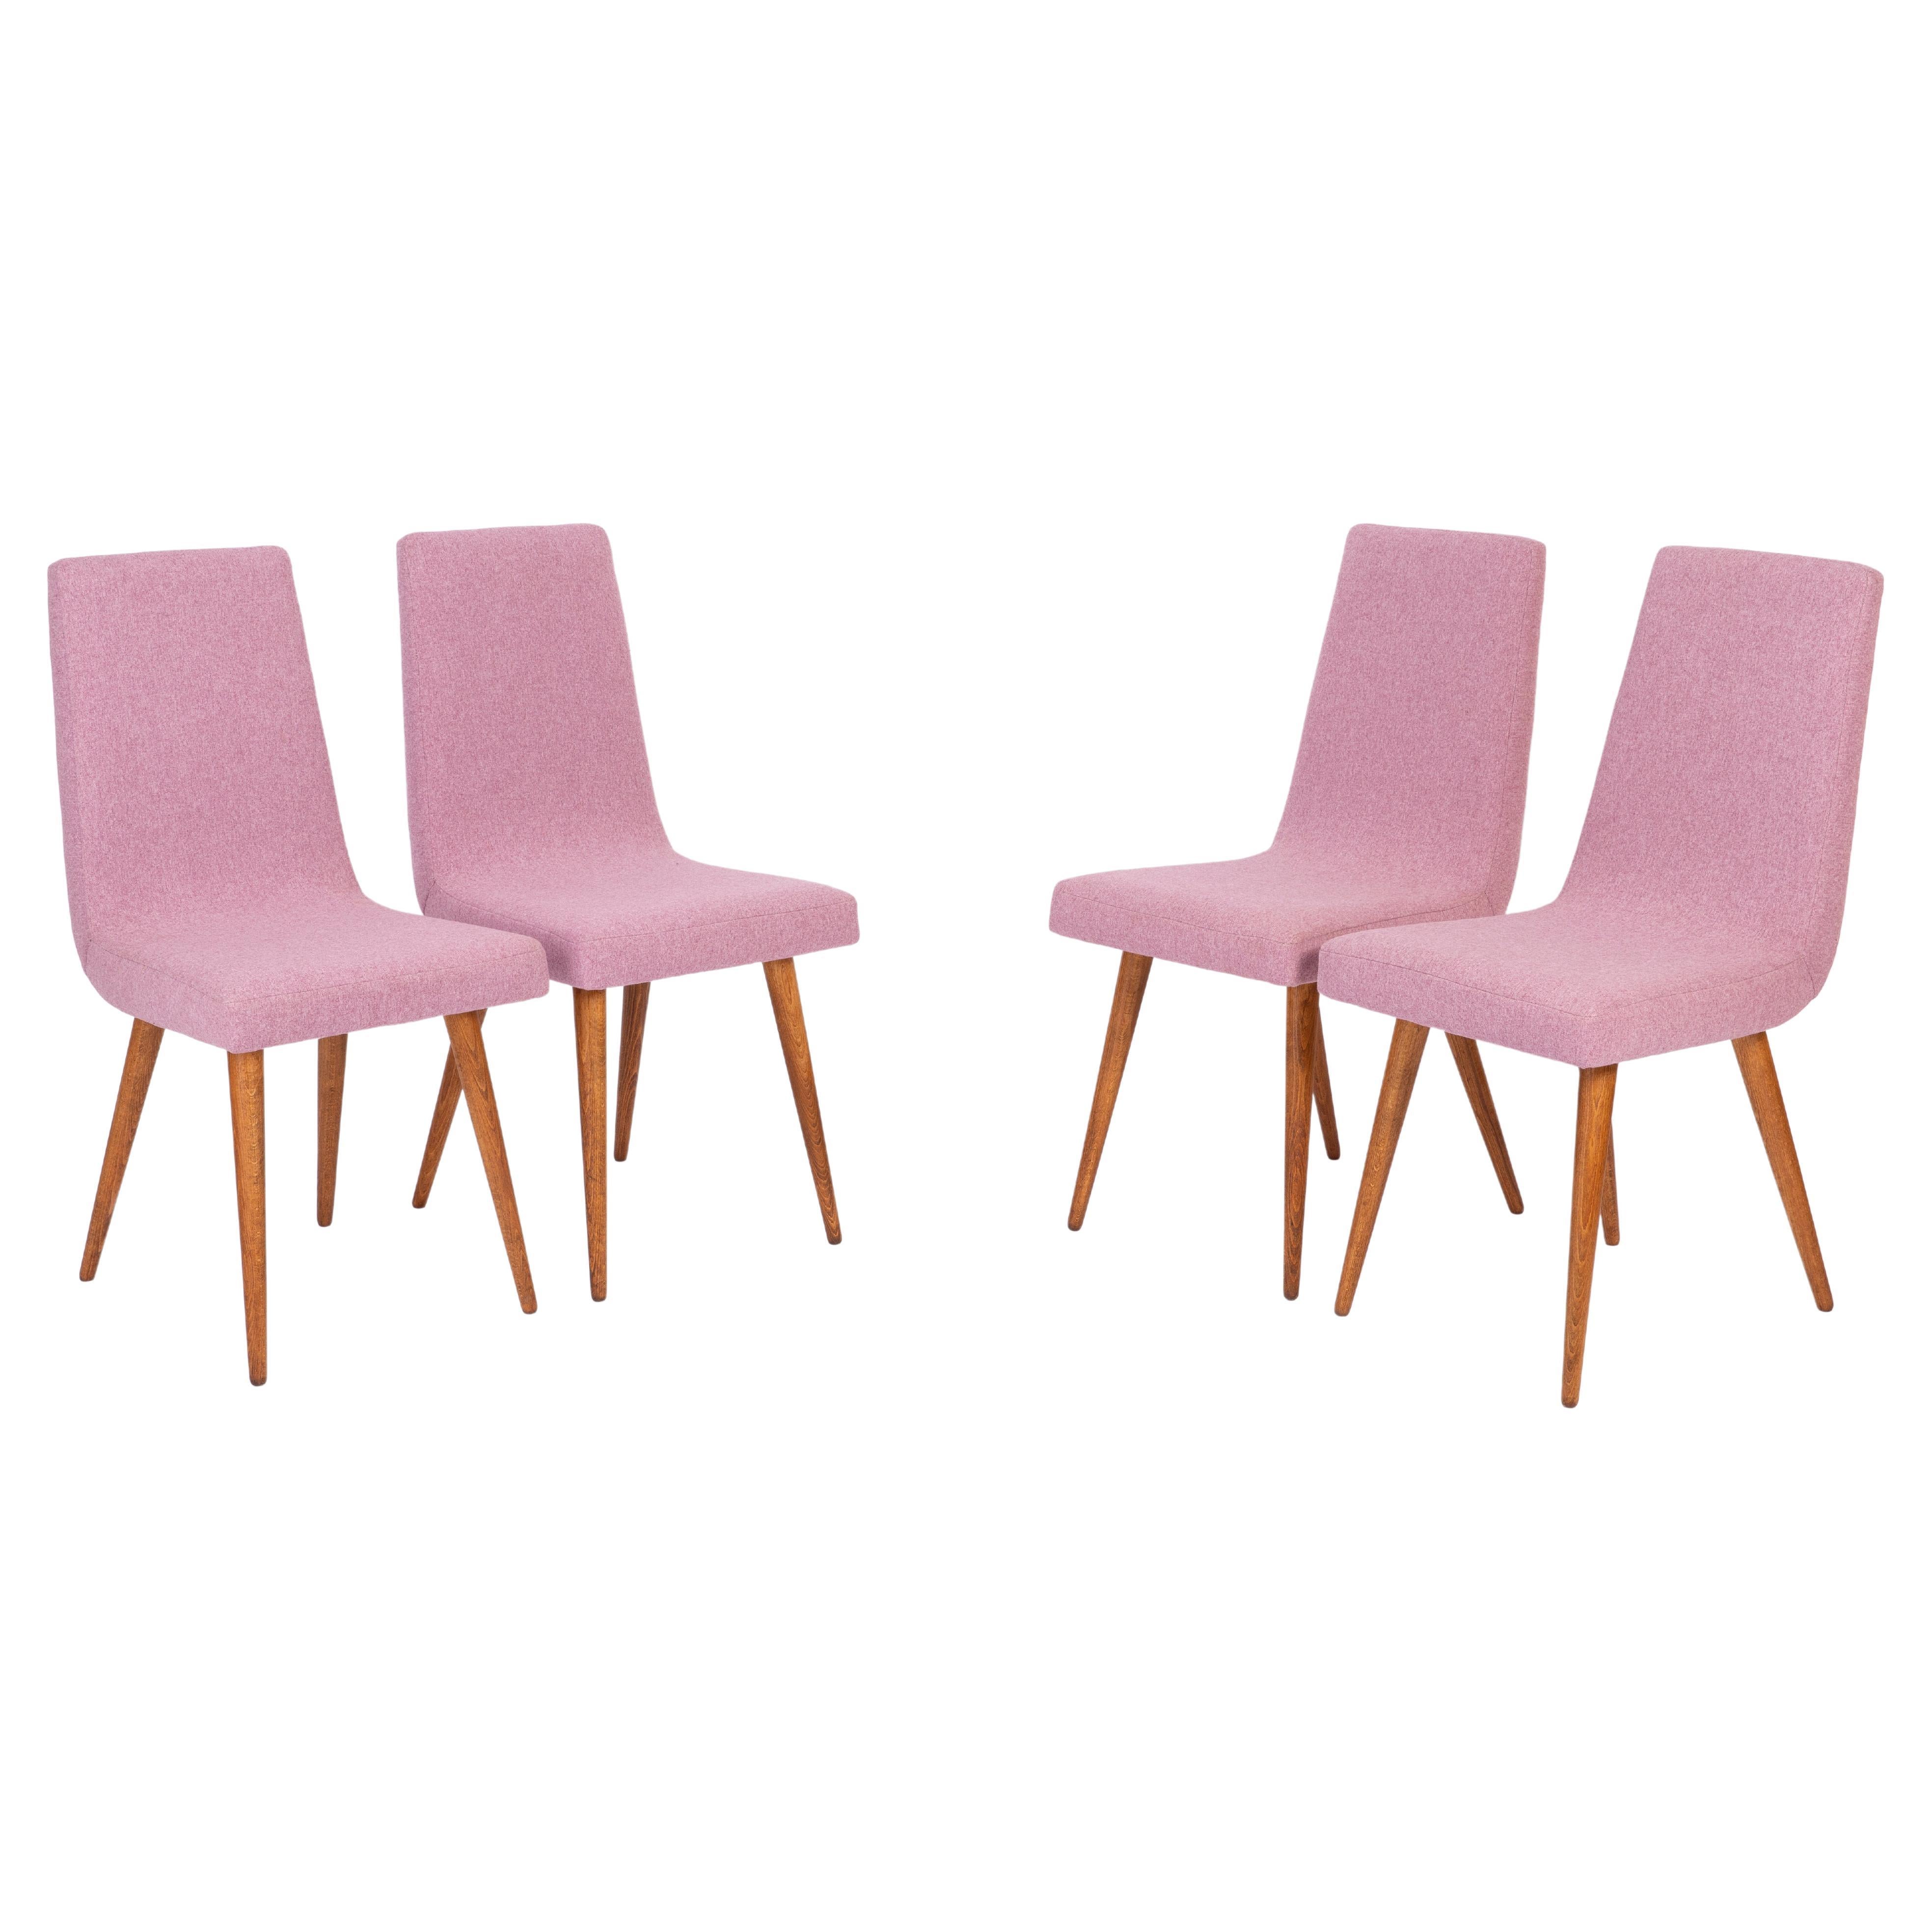 Set of Four Mid-Century Vintage Pink Melange Chairs, Europe, 1960s For Sale